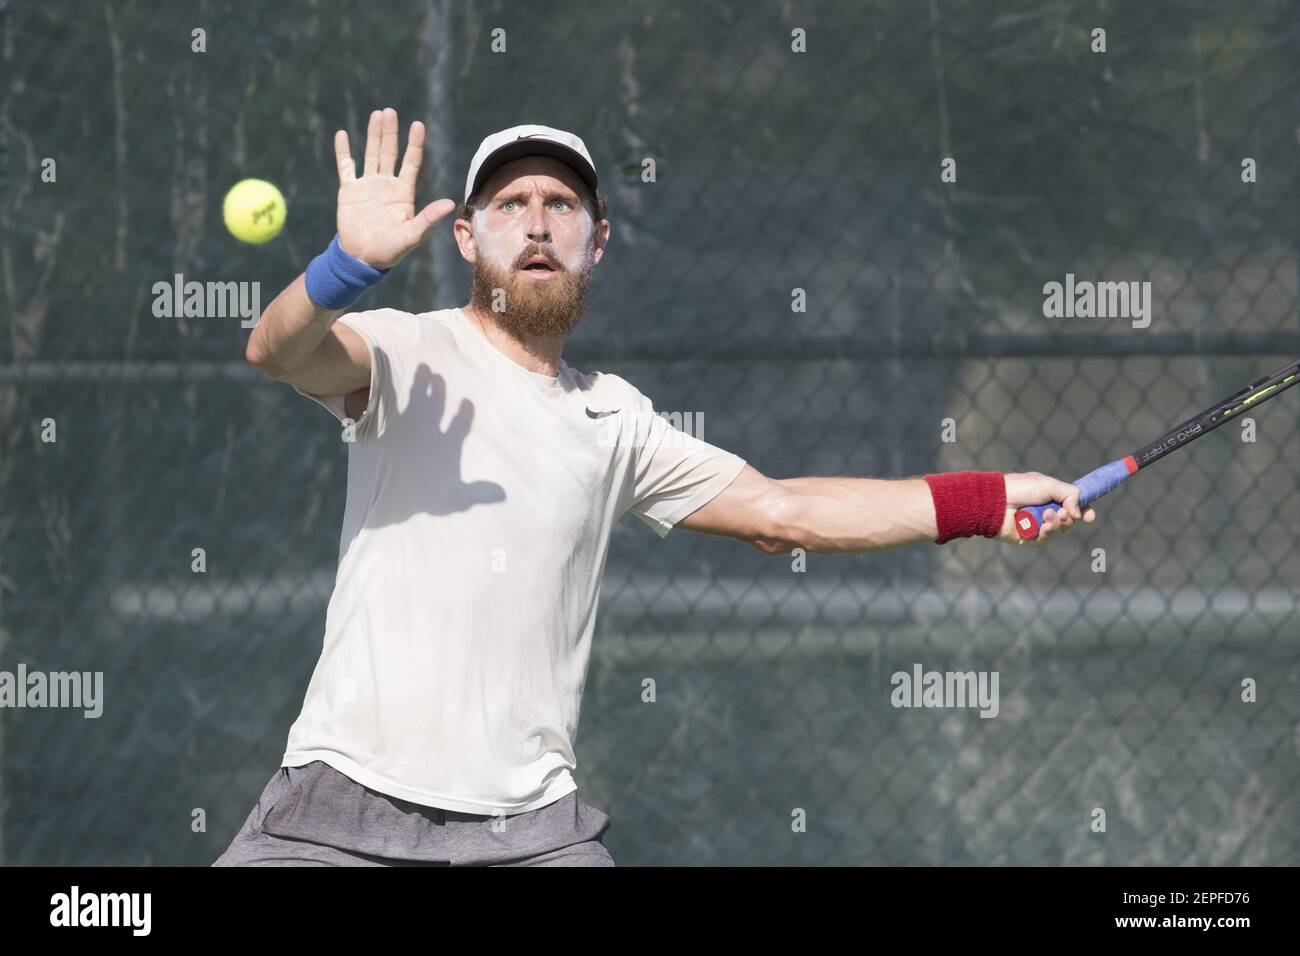 Nick Chappell of USA plays a backhand in the match Singles Finals against Vasil Kirkov of USA during The World Tennis Tournament Cancun 2019 on December 15, 2019 in Cancun, Mexico (Photo